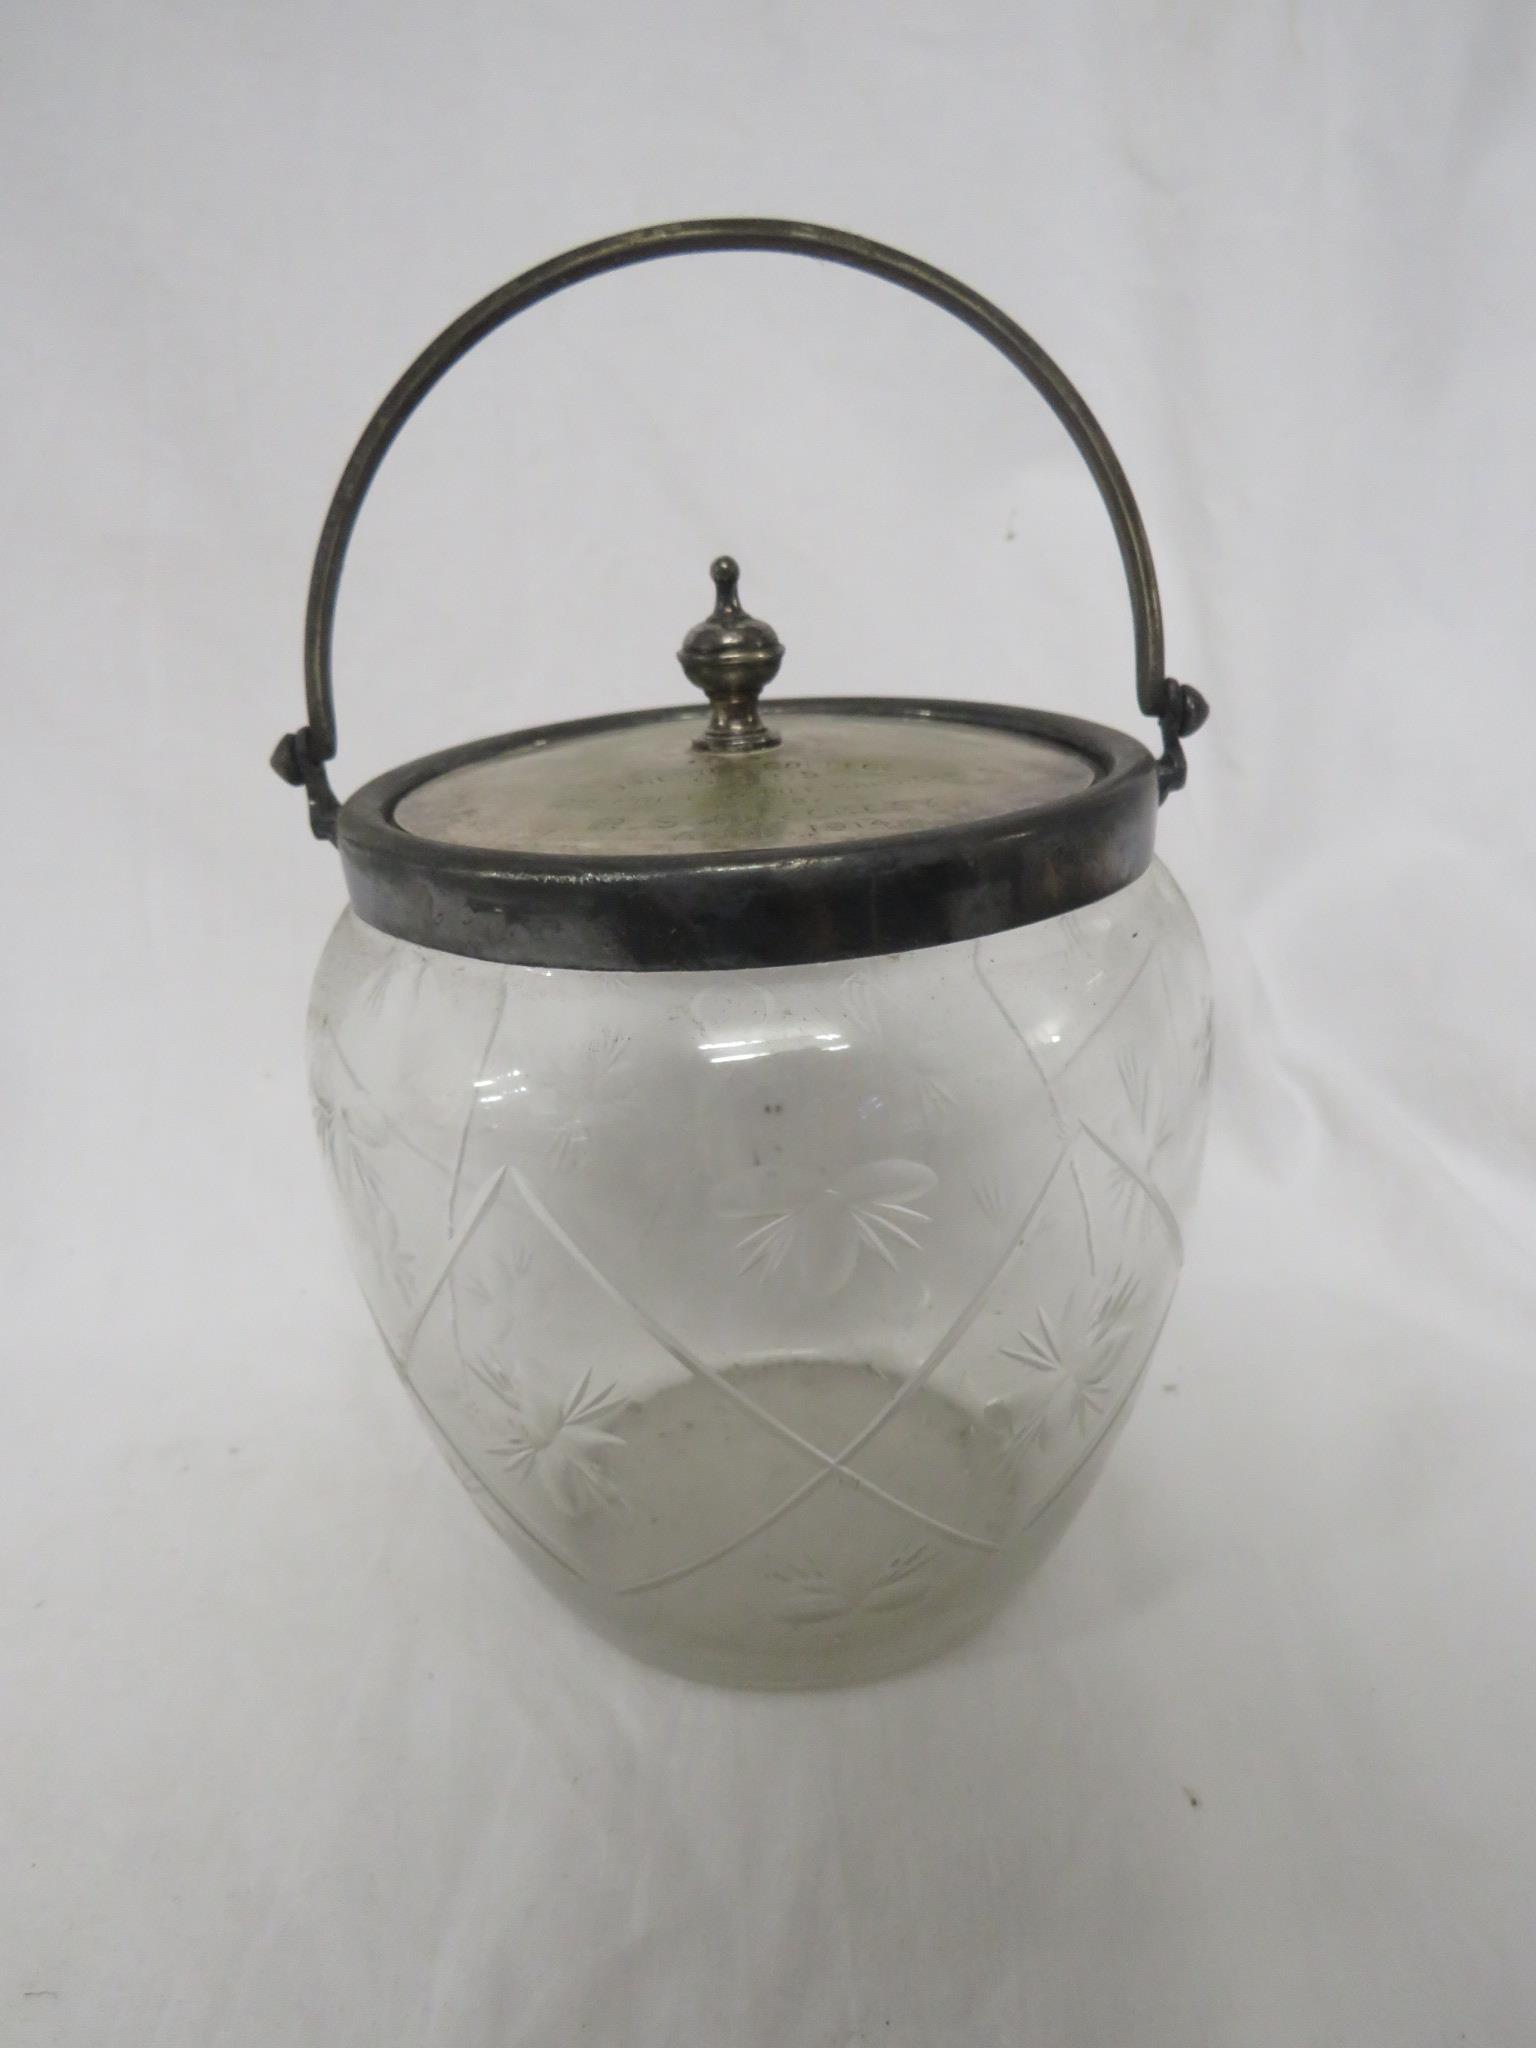 CUT GLASS BISCUIT BARREL WITH SILVER PLATED LID WITH 1914 BRIGHTON COLLEGE SPORTS ENGRAVING TO R S